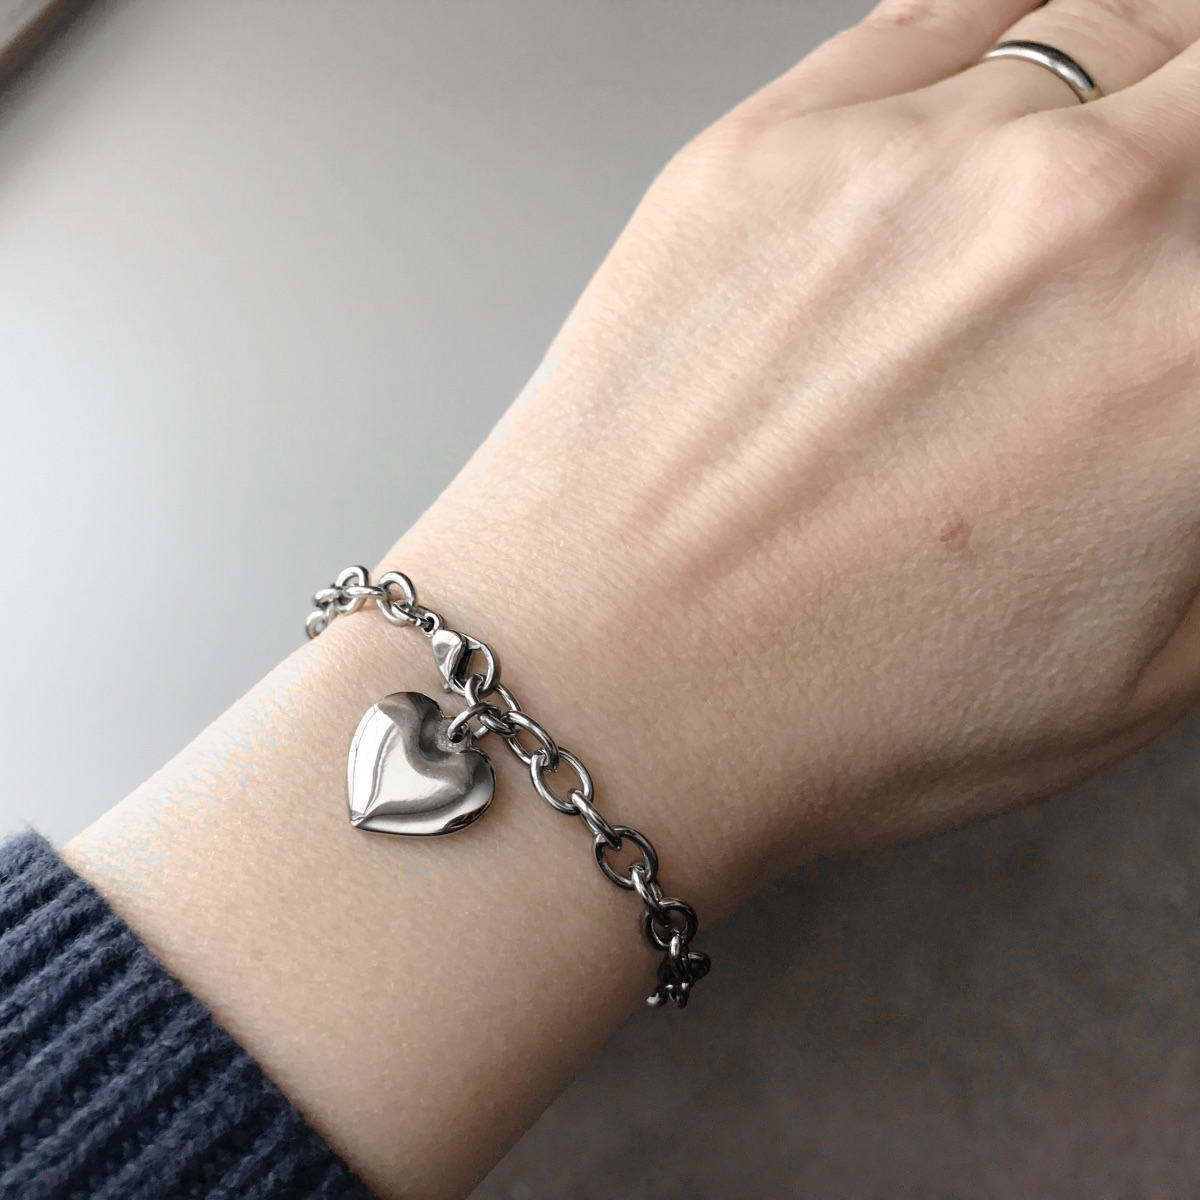 Stainless Steel Charm Bracelet, Silver Heart, Jewelry for Mom, Charm Chain, Great for Sensitive Skin